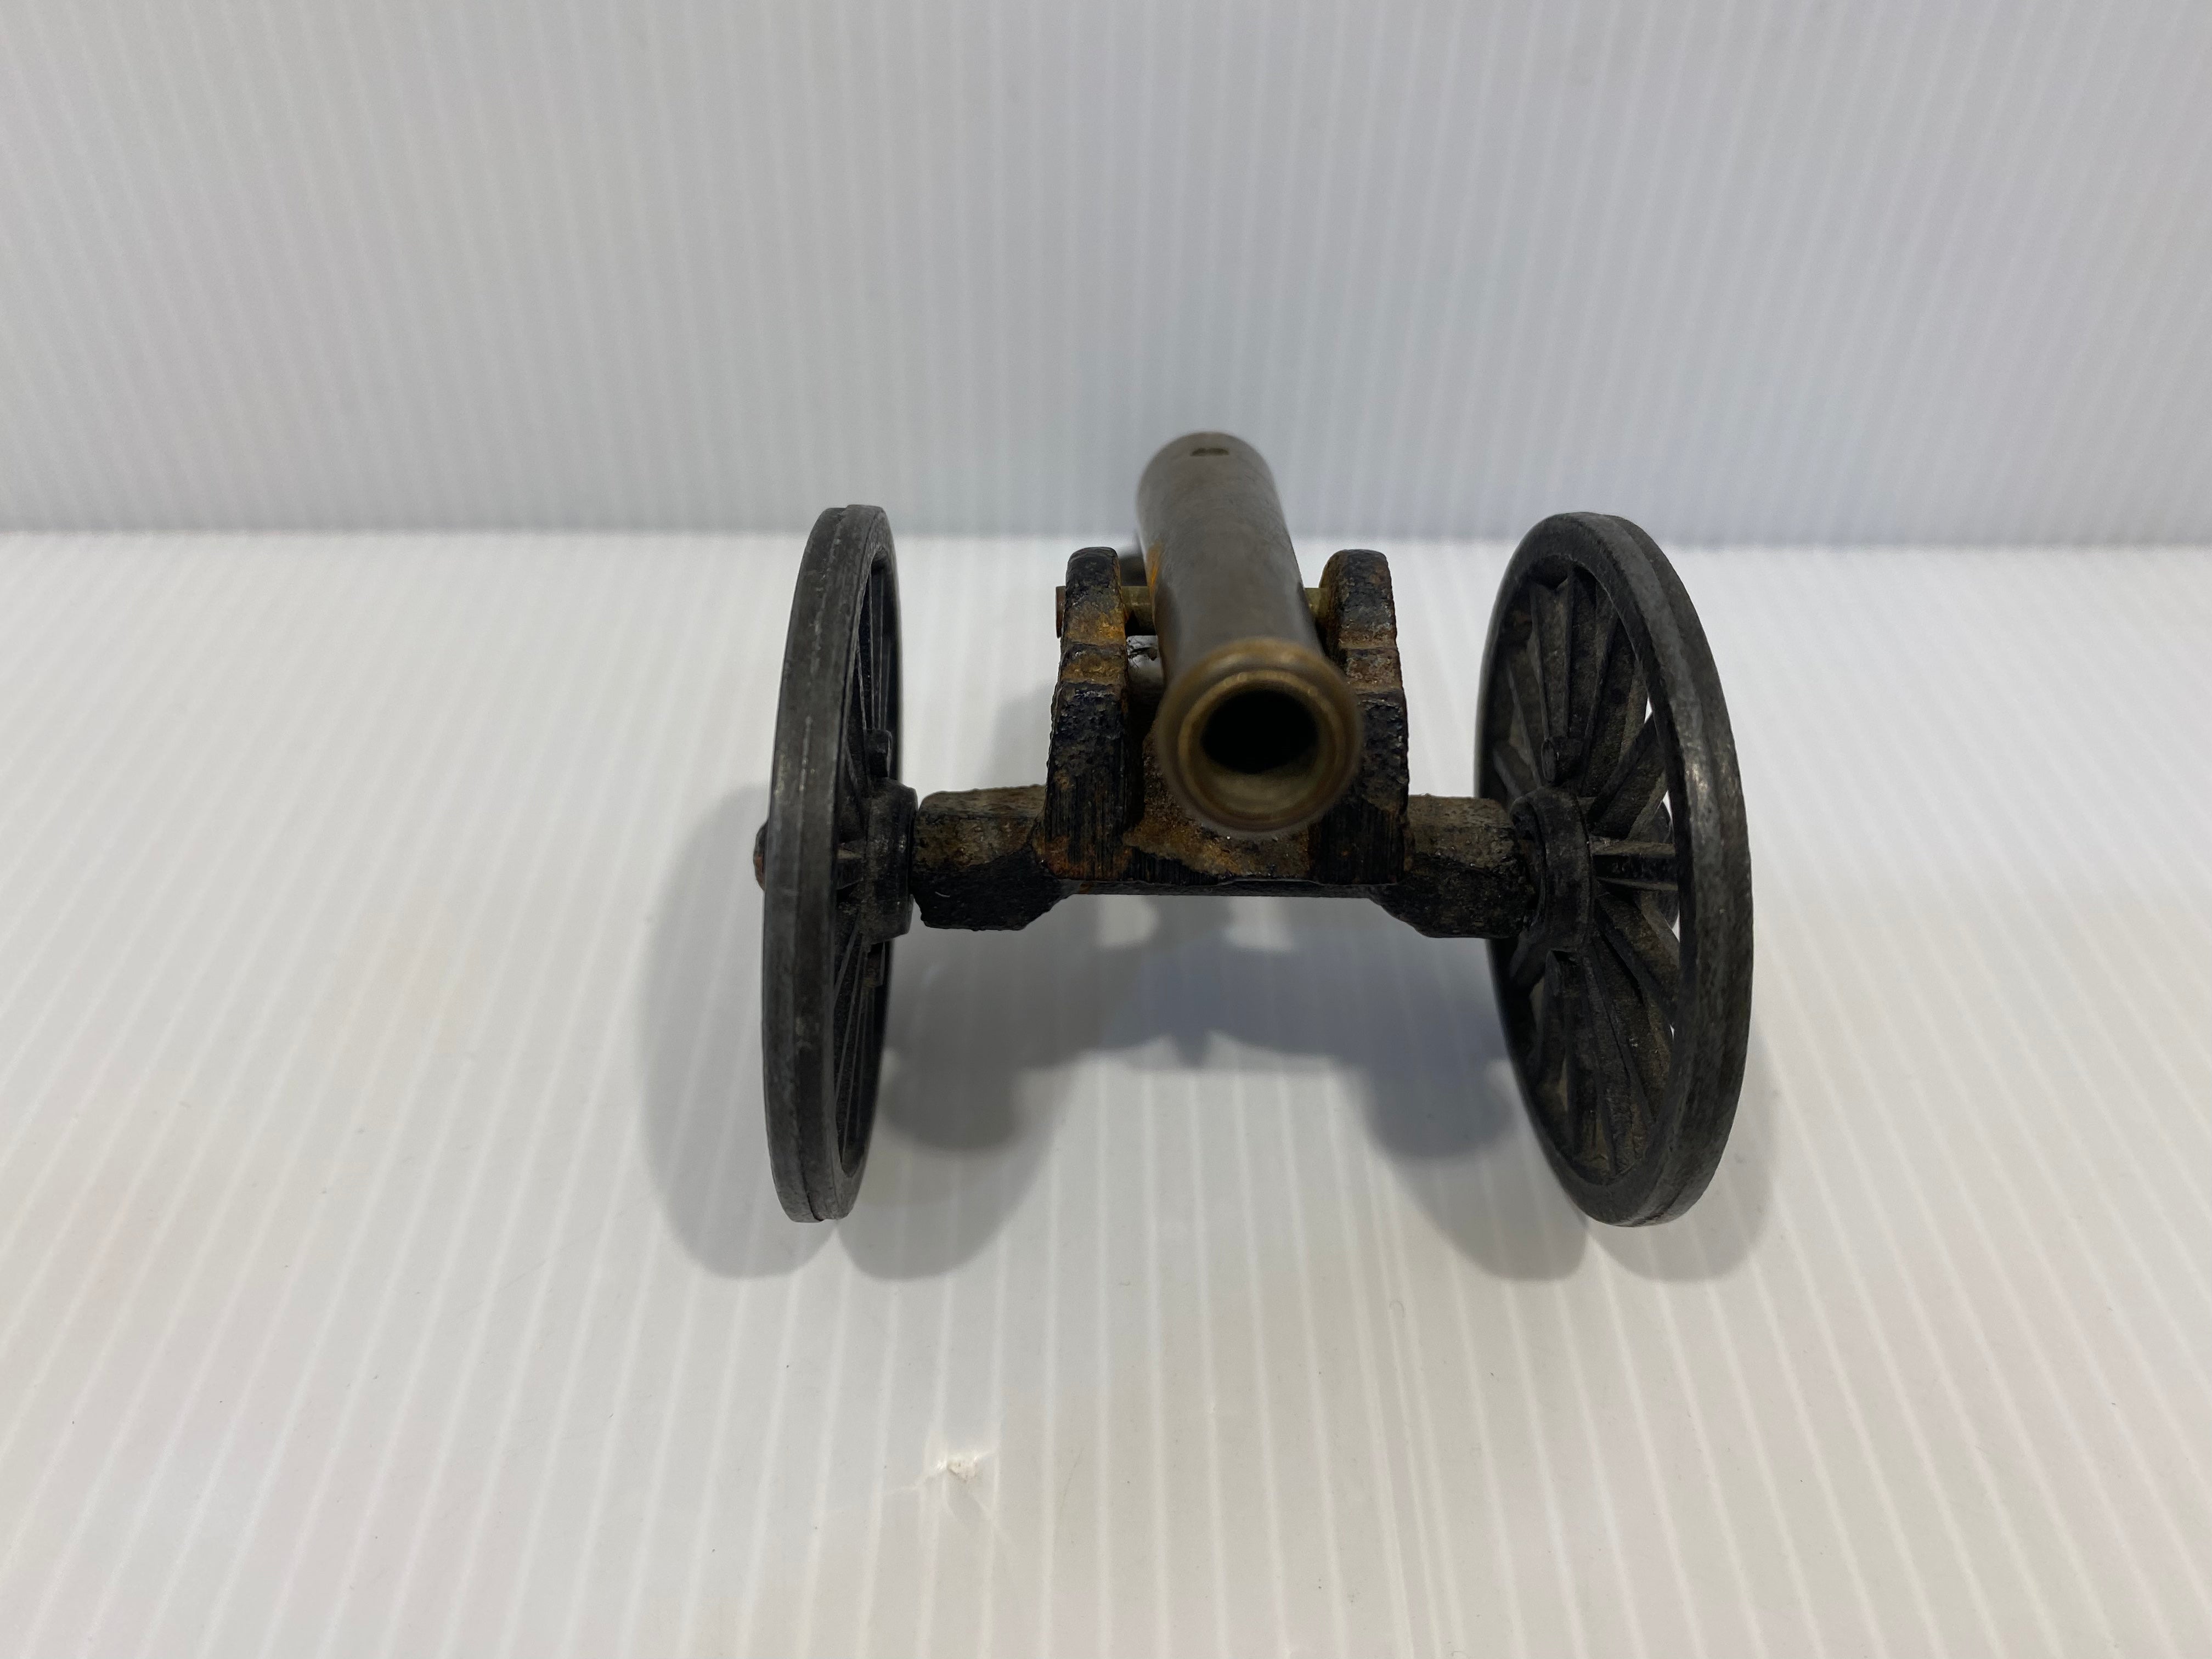 MCFO cast iron and brass model toy